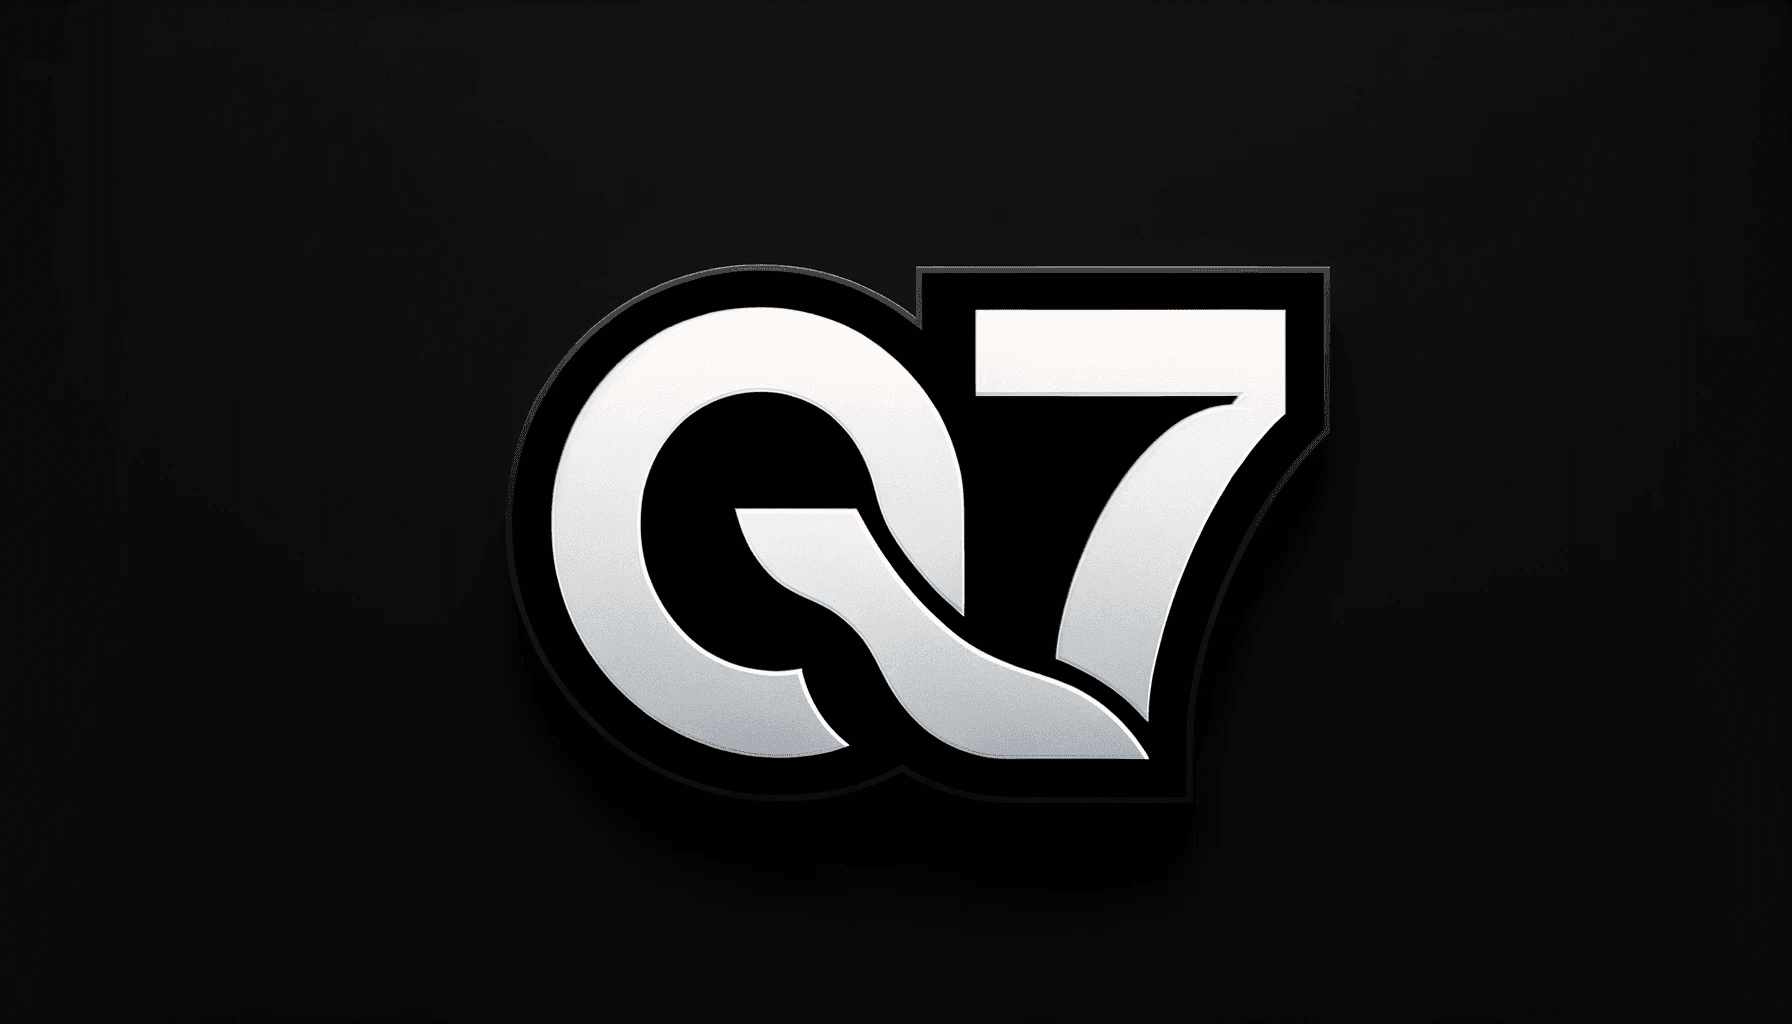 DALL·E 2023-12-20 17.49.24 - A simplified logo design with a black background and a large, silver 'Q7' in the center. The letters should be styled in a more straightforward and le.png